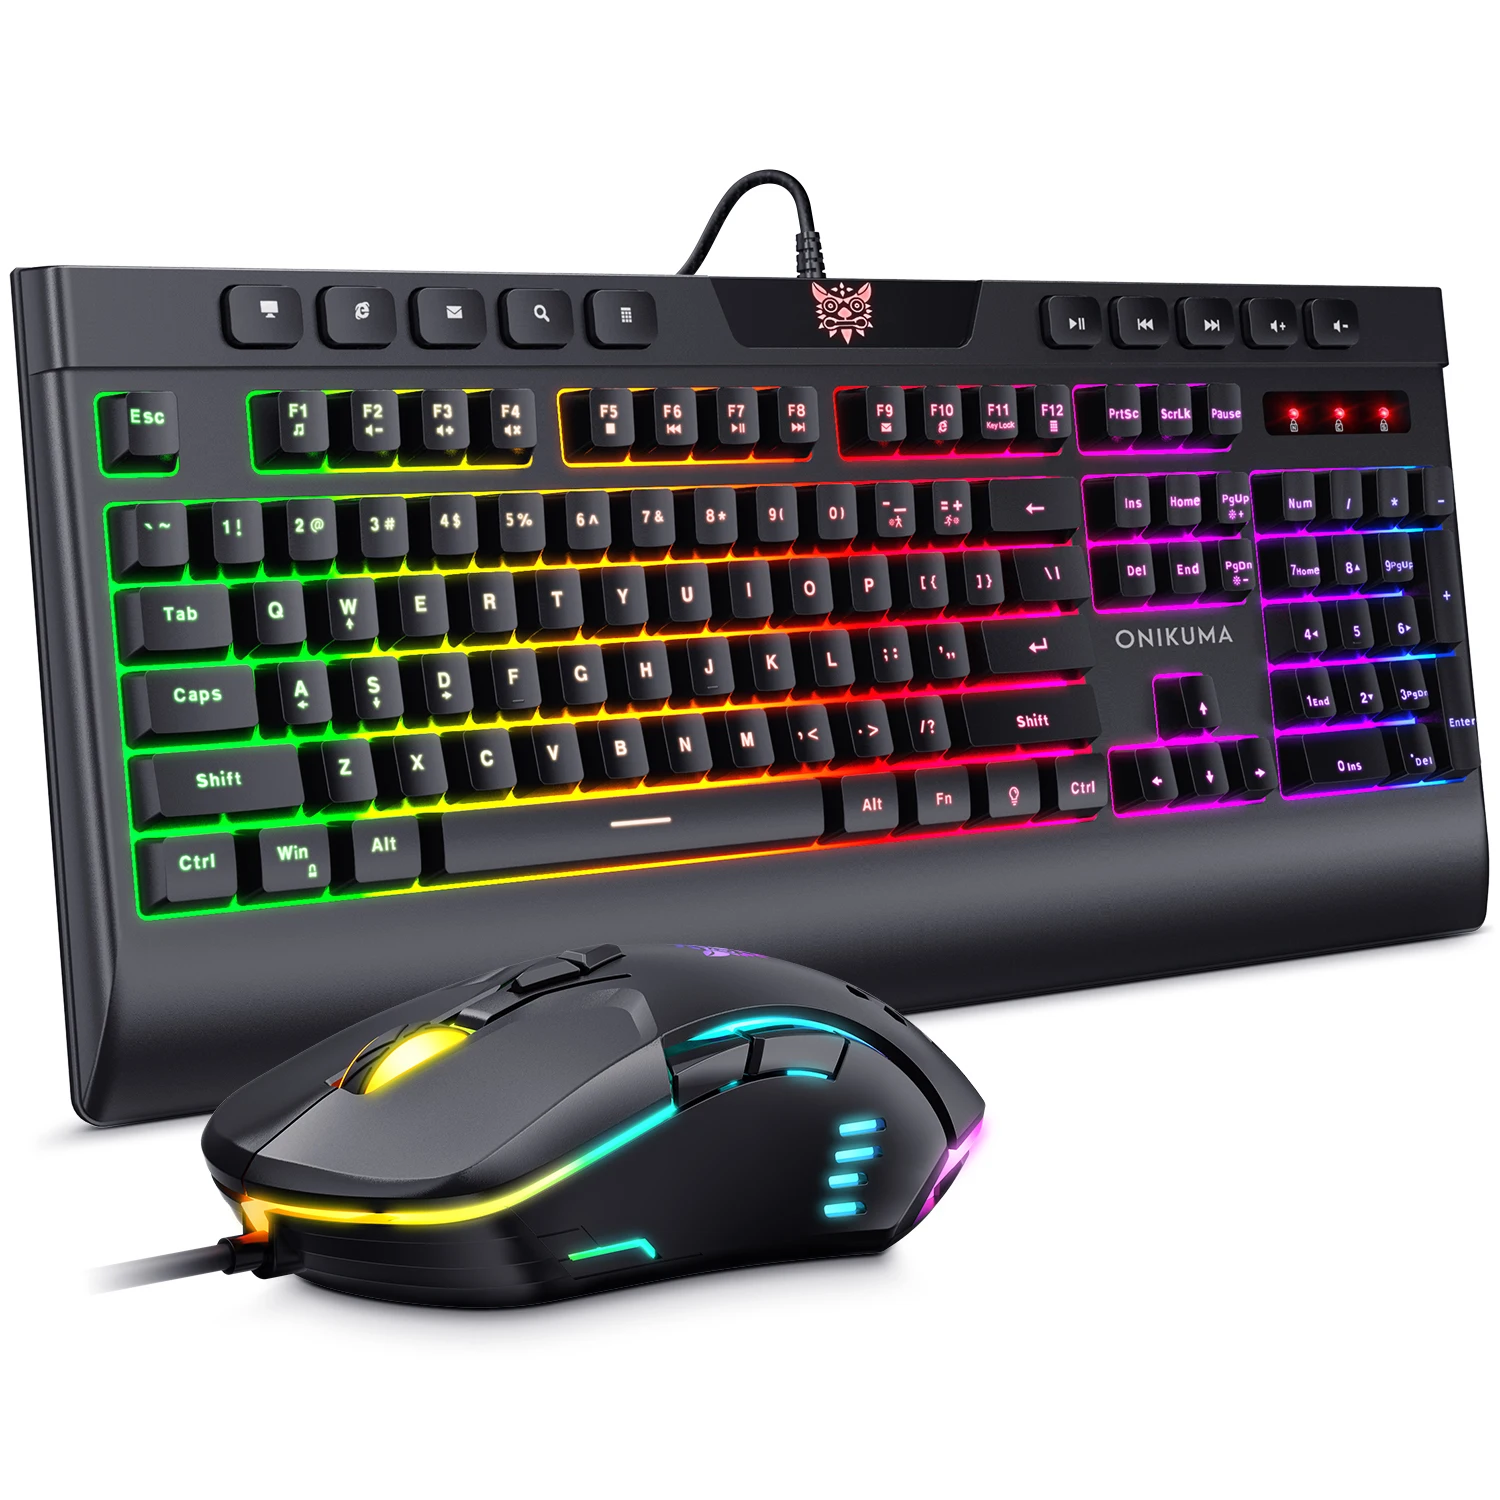 

ONIKUMA Gaming keyboard Wired Gaming Mouse Kit 104 Keycaps With RGB Backlight keyboard Gamer Ergonomic Mouse For PC Laptop